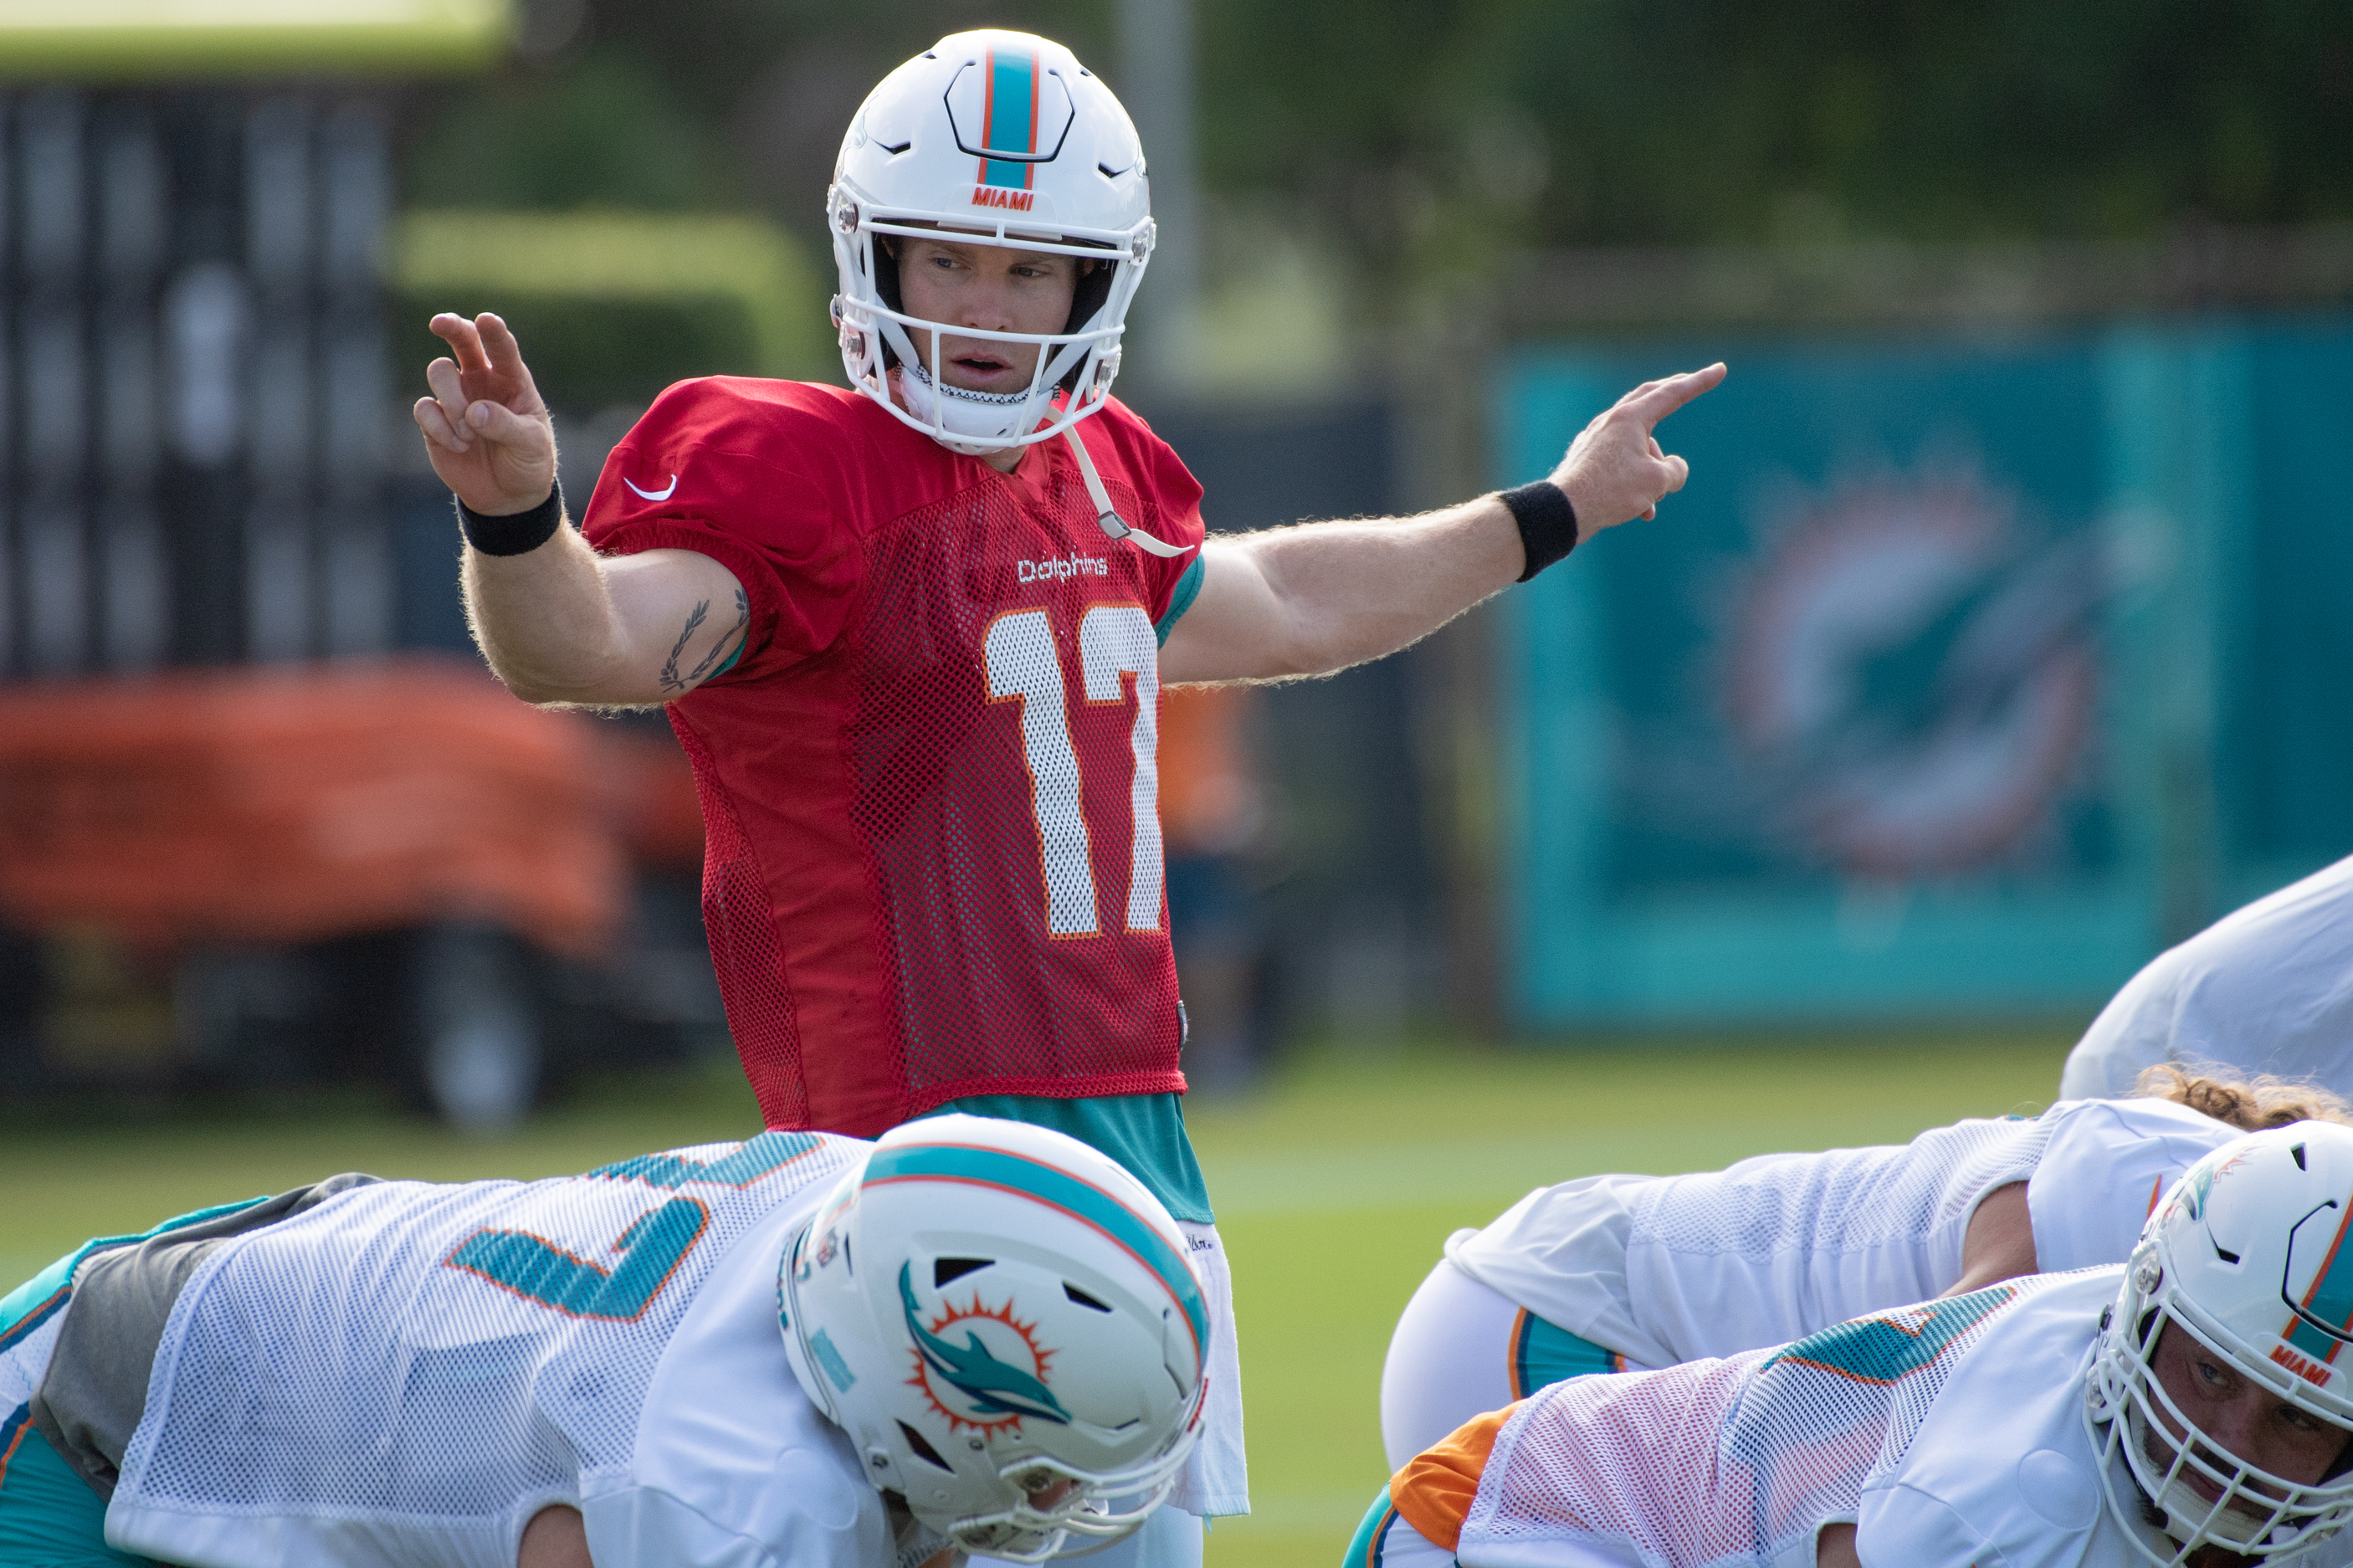 Ryan Tannehill throws for two scores as Dolphins earn 22-9 victory